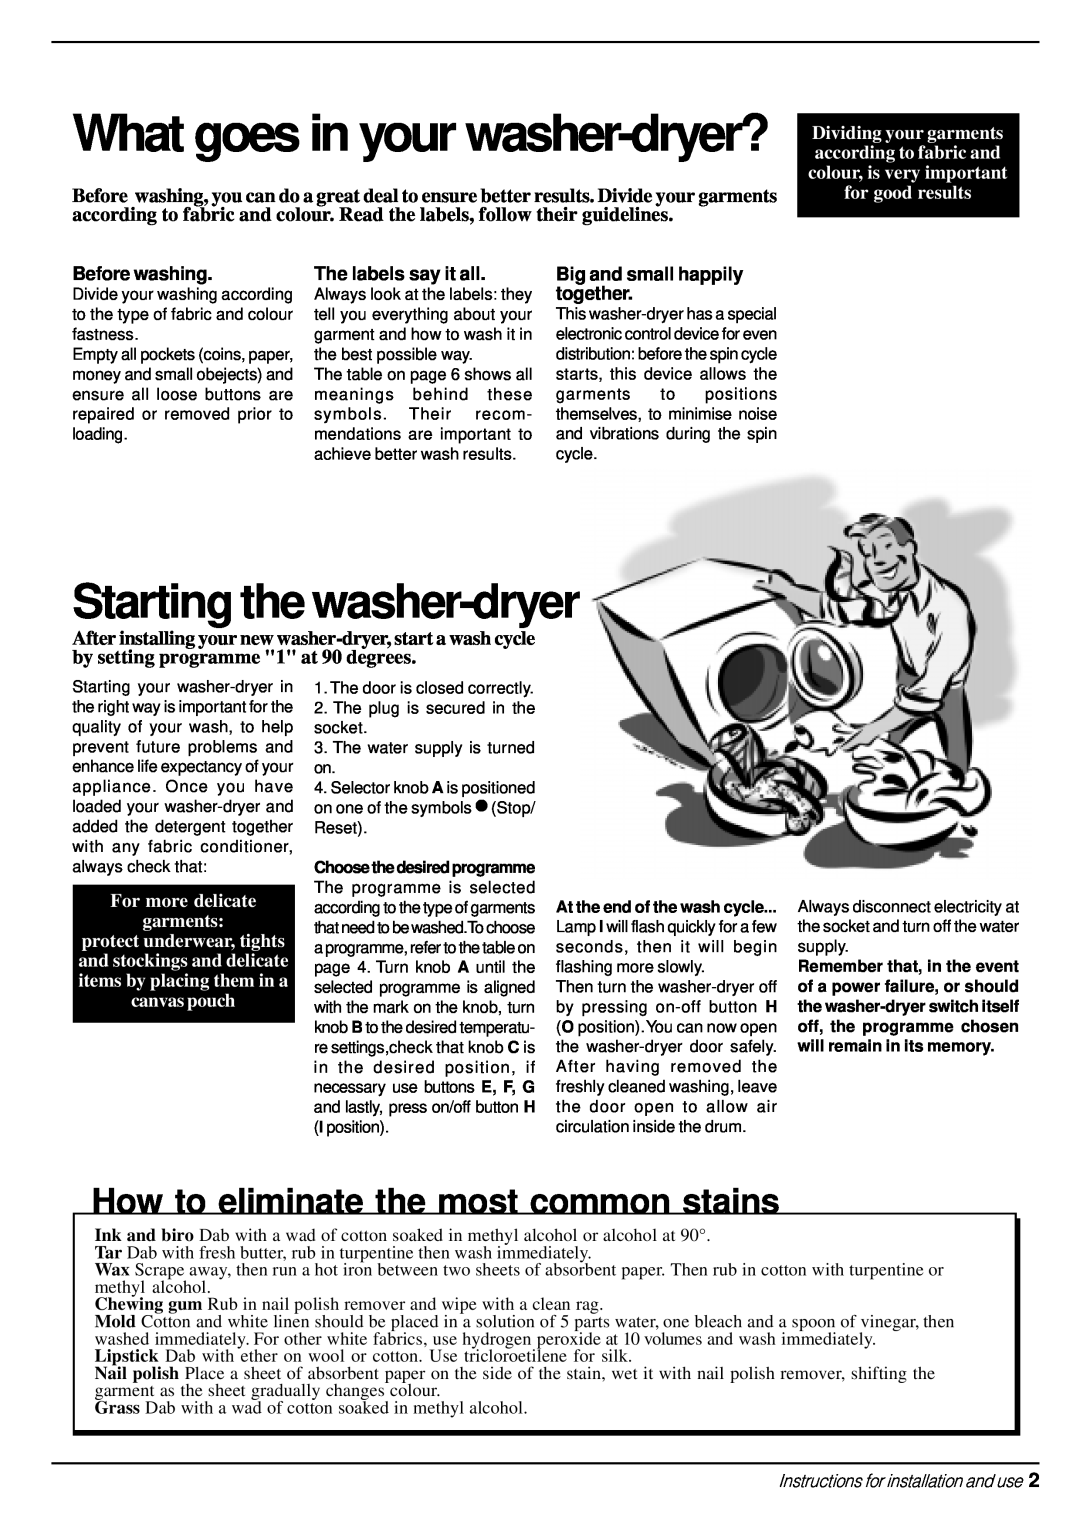 Indesit WD 12 X manual What goes in your washer-dryer?, How to eliminate the most common stains, Starting the washer-dryer 